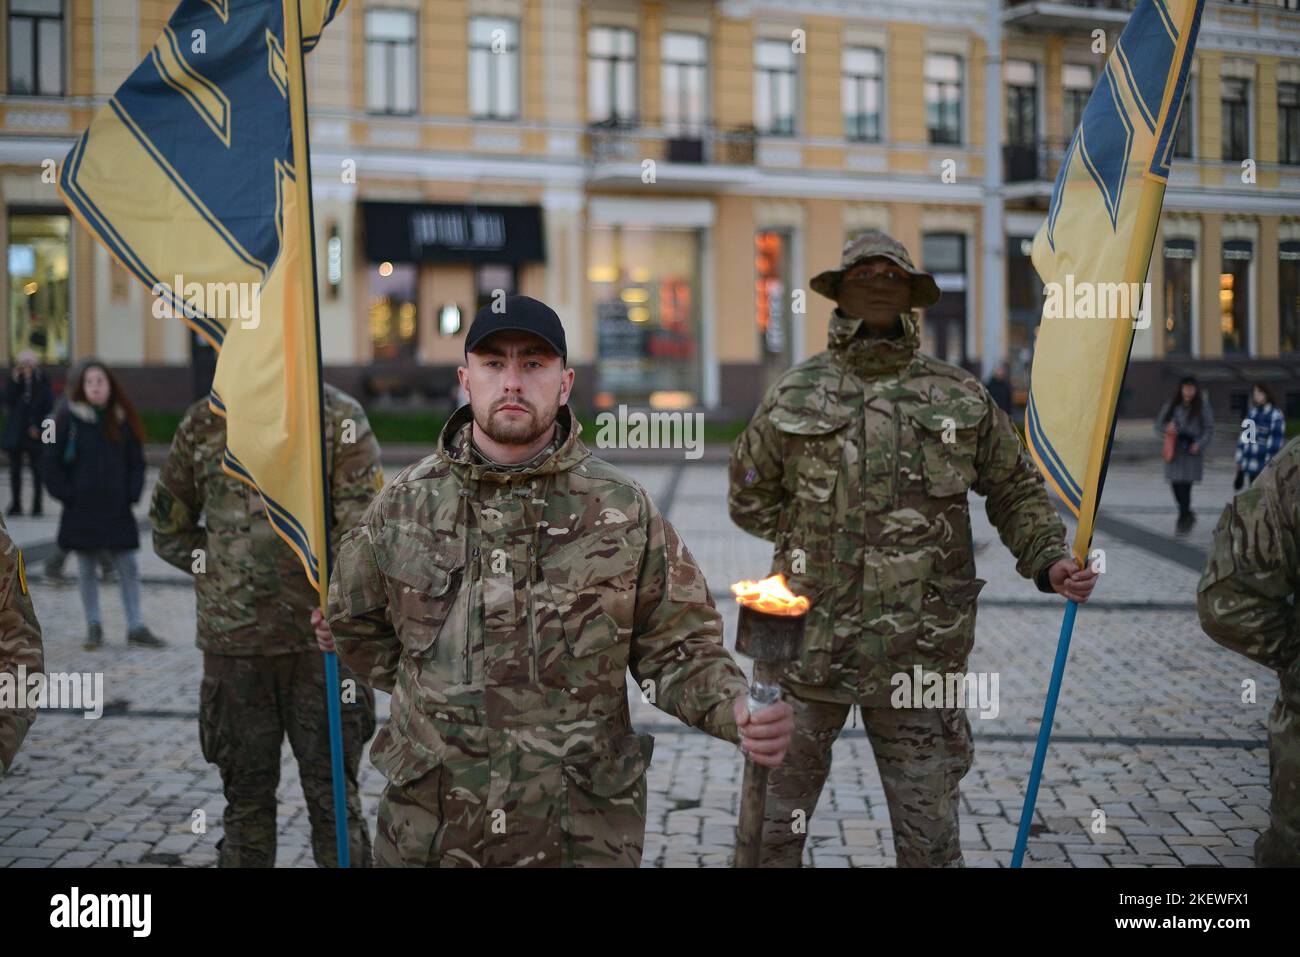 KYIV, UKRAINE - NOVEMBER 13, 2022 - Soldiers of Azov regiment hold flags and burning torches to commemorate their fallen brothers in arms during the Heavenly Regiment of Azov mystery in Sofiyska Square, Kyiv, capital of Ukraine. Stock Photo